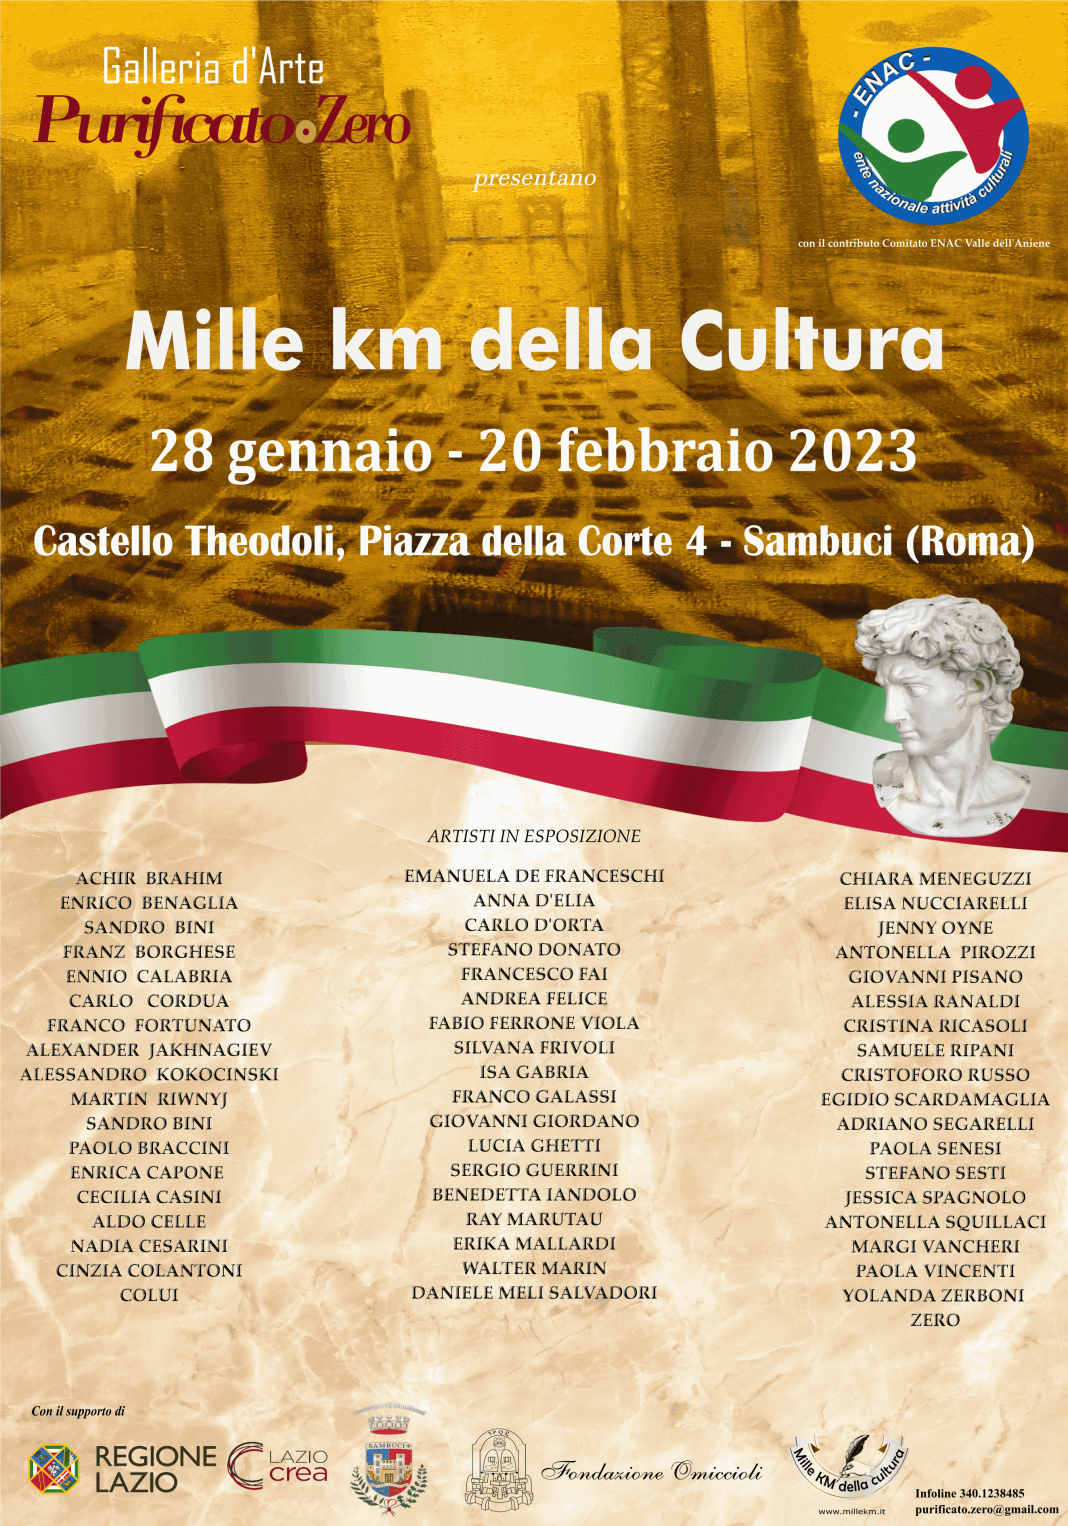 Mille km della Culturahttps://www.exibart.com/repository/media/formidable/11/img/af5/Locandina-Mille-km-della-Cultura_Sambuci_artisti_exibart-1-1-1-1068x1526.png